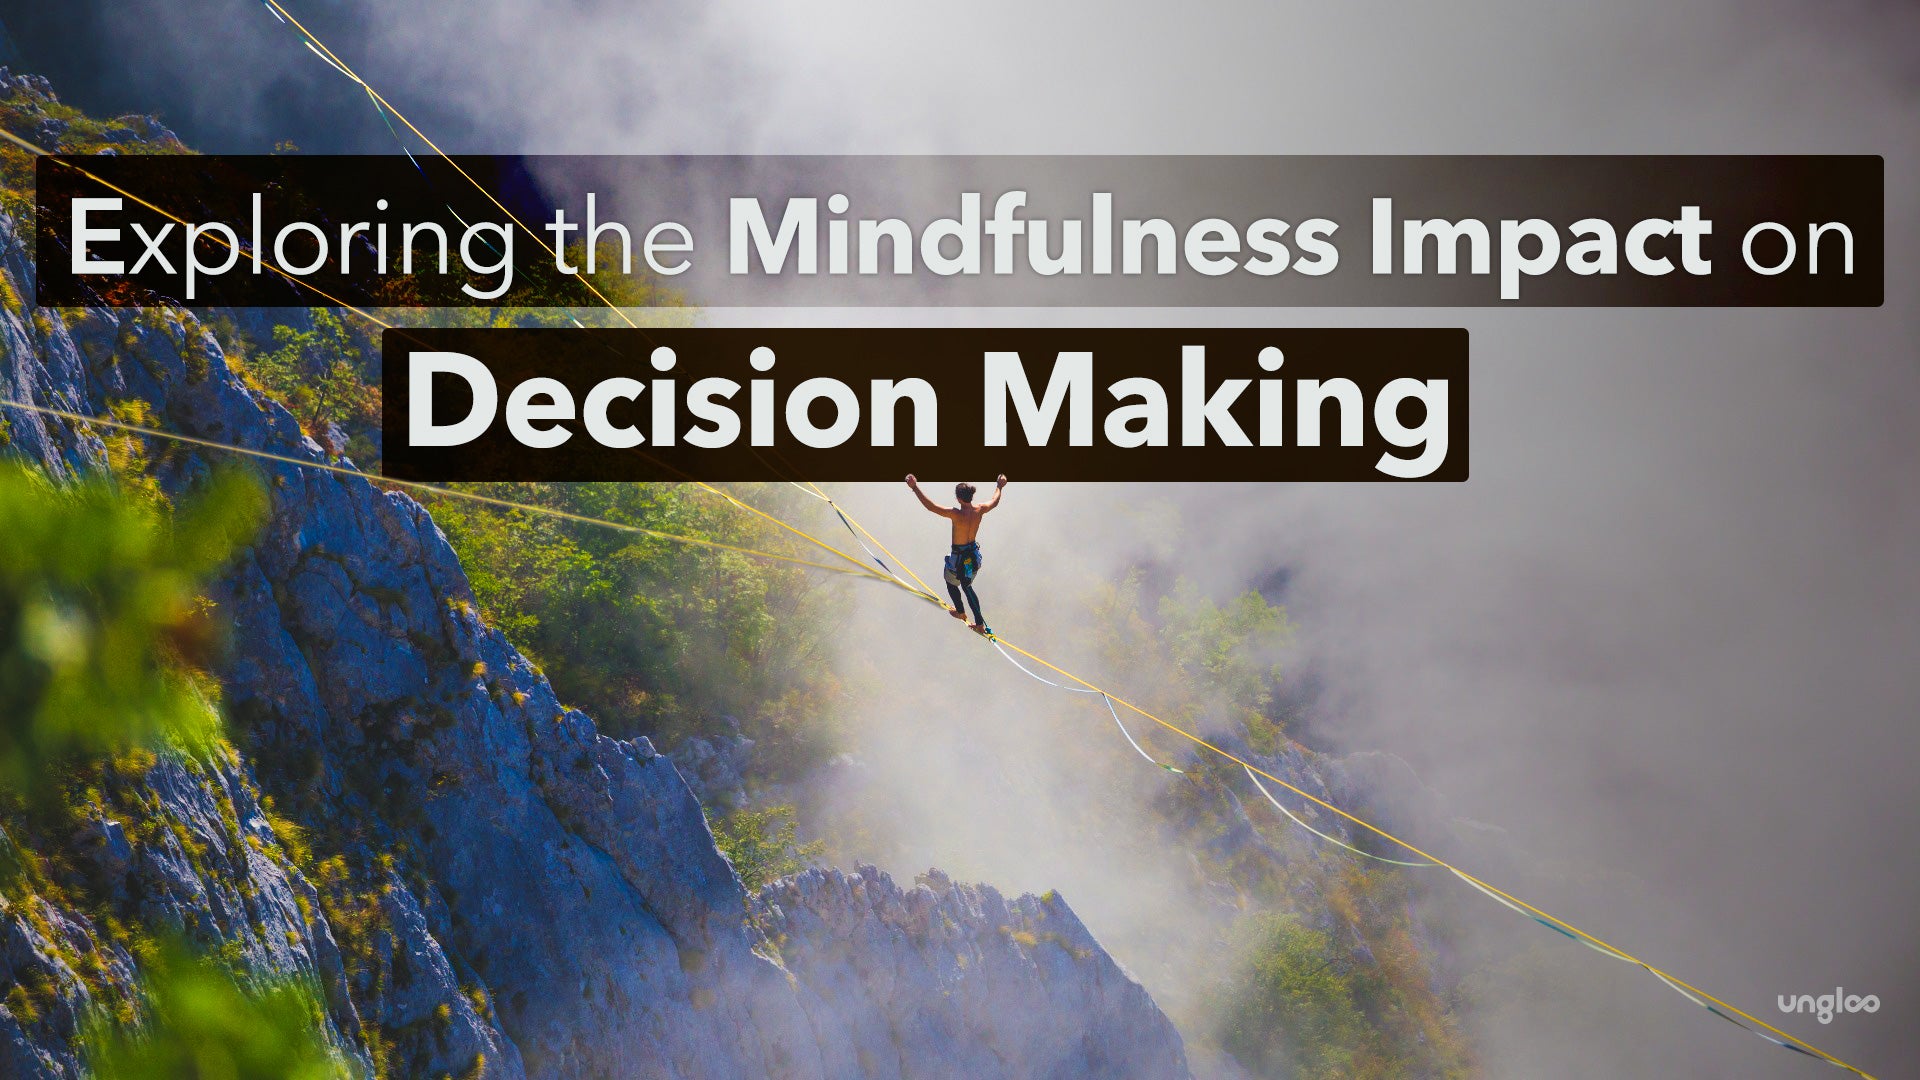 banner representing the impact that mindfulness has on making decisions